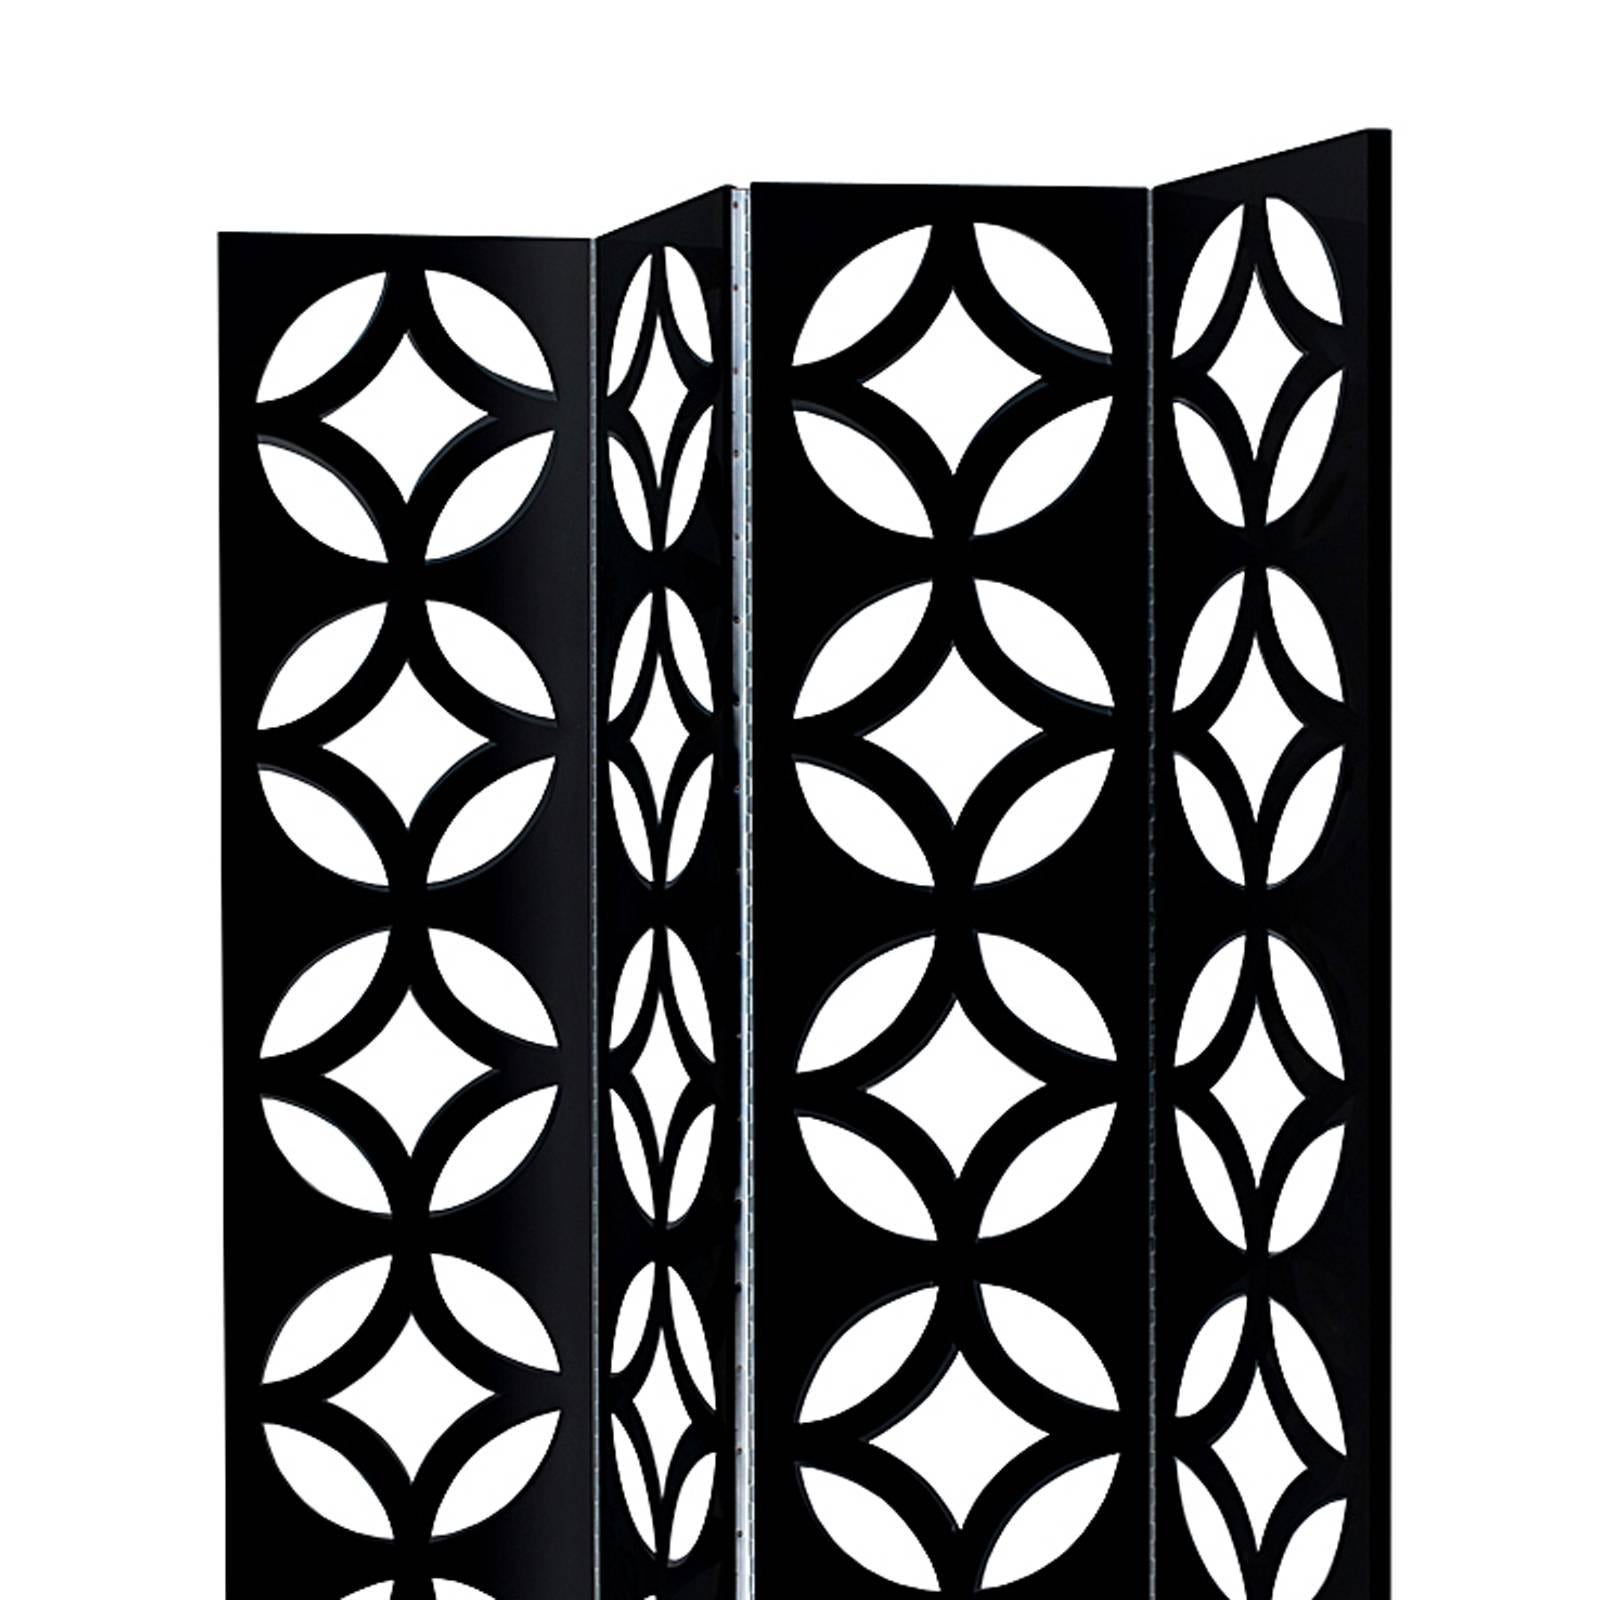 Folding screen discus, with black or white
lacquered wood, high gloss finish. Divided in
three folding panels. Hinges in nickel-plated.

 